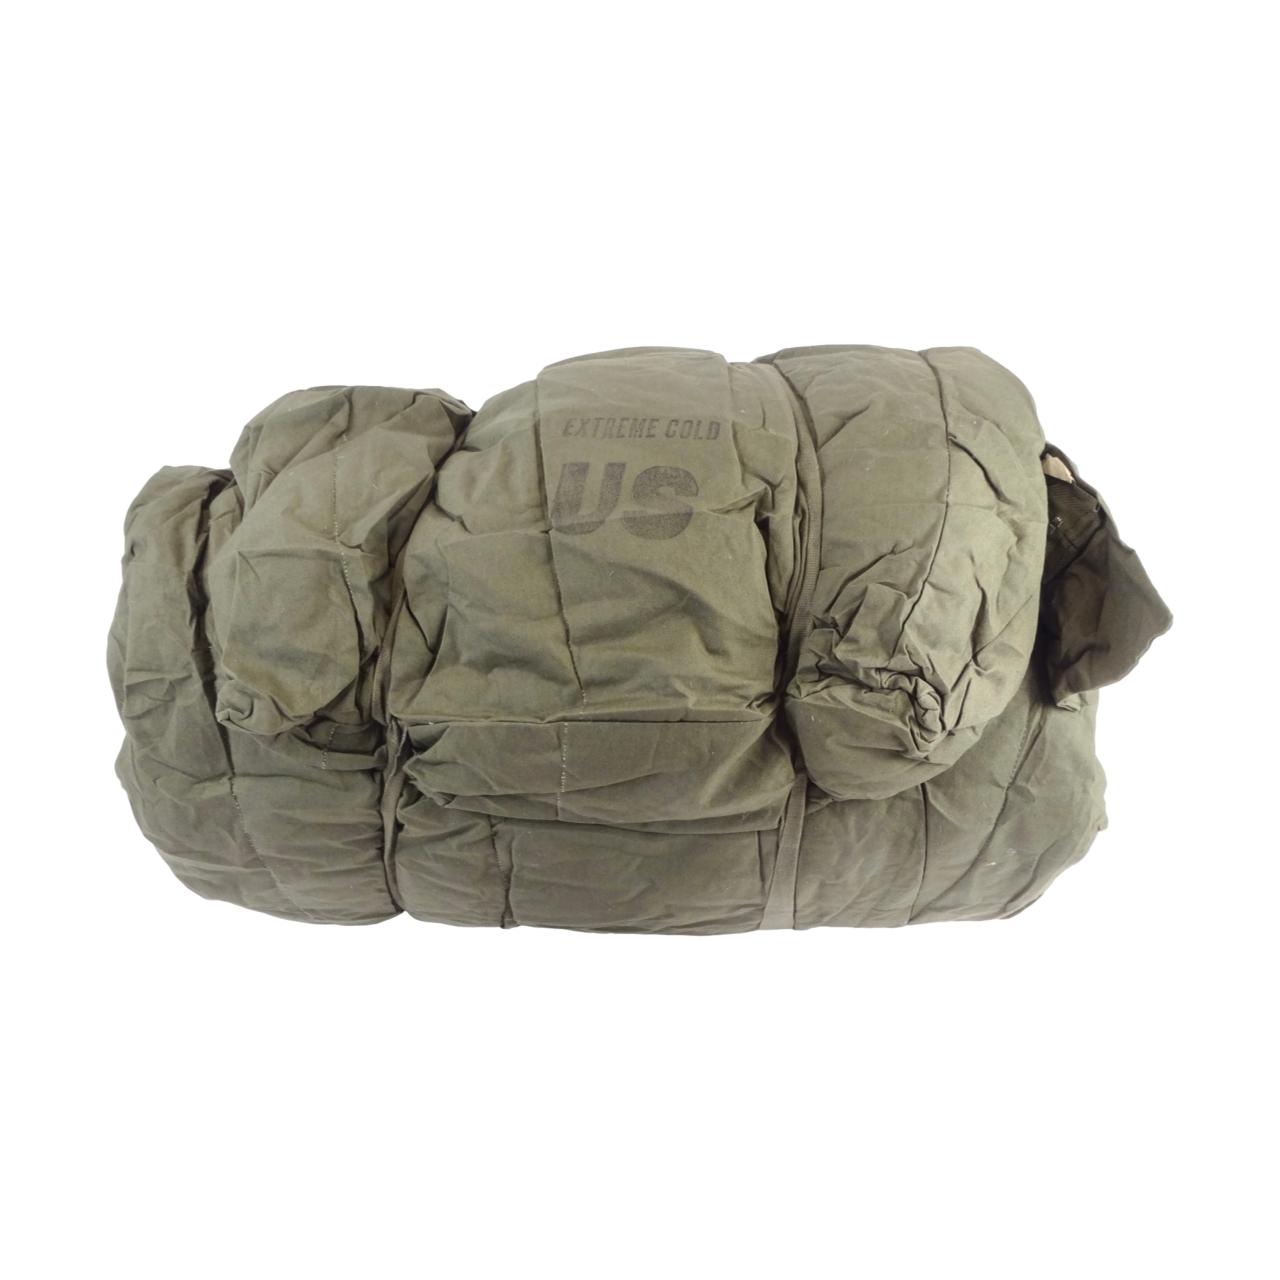 US Military Extreme Cold Weather Sleeping Bag (mummy-style)